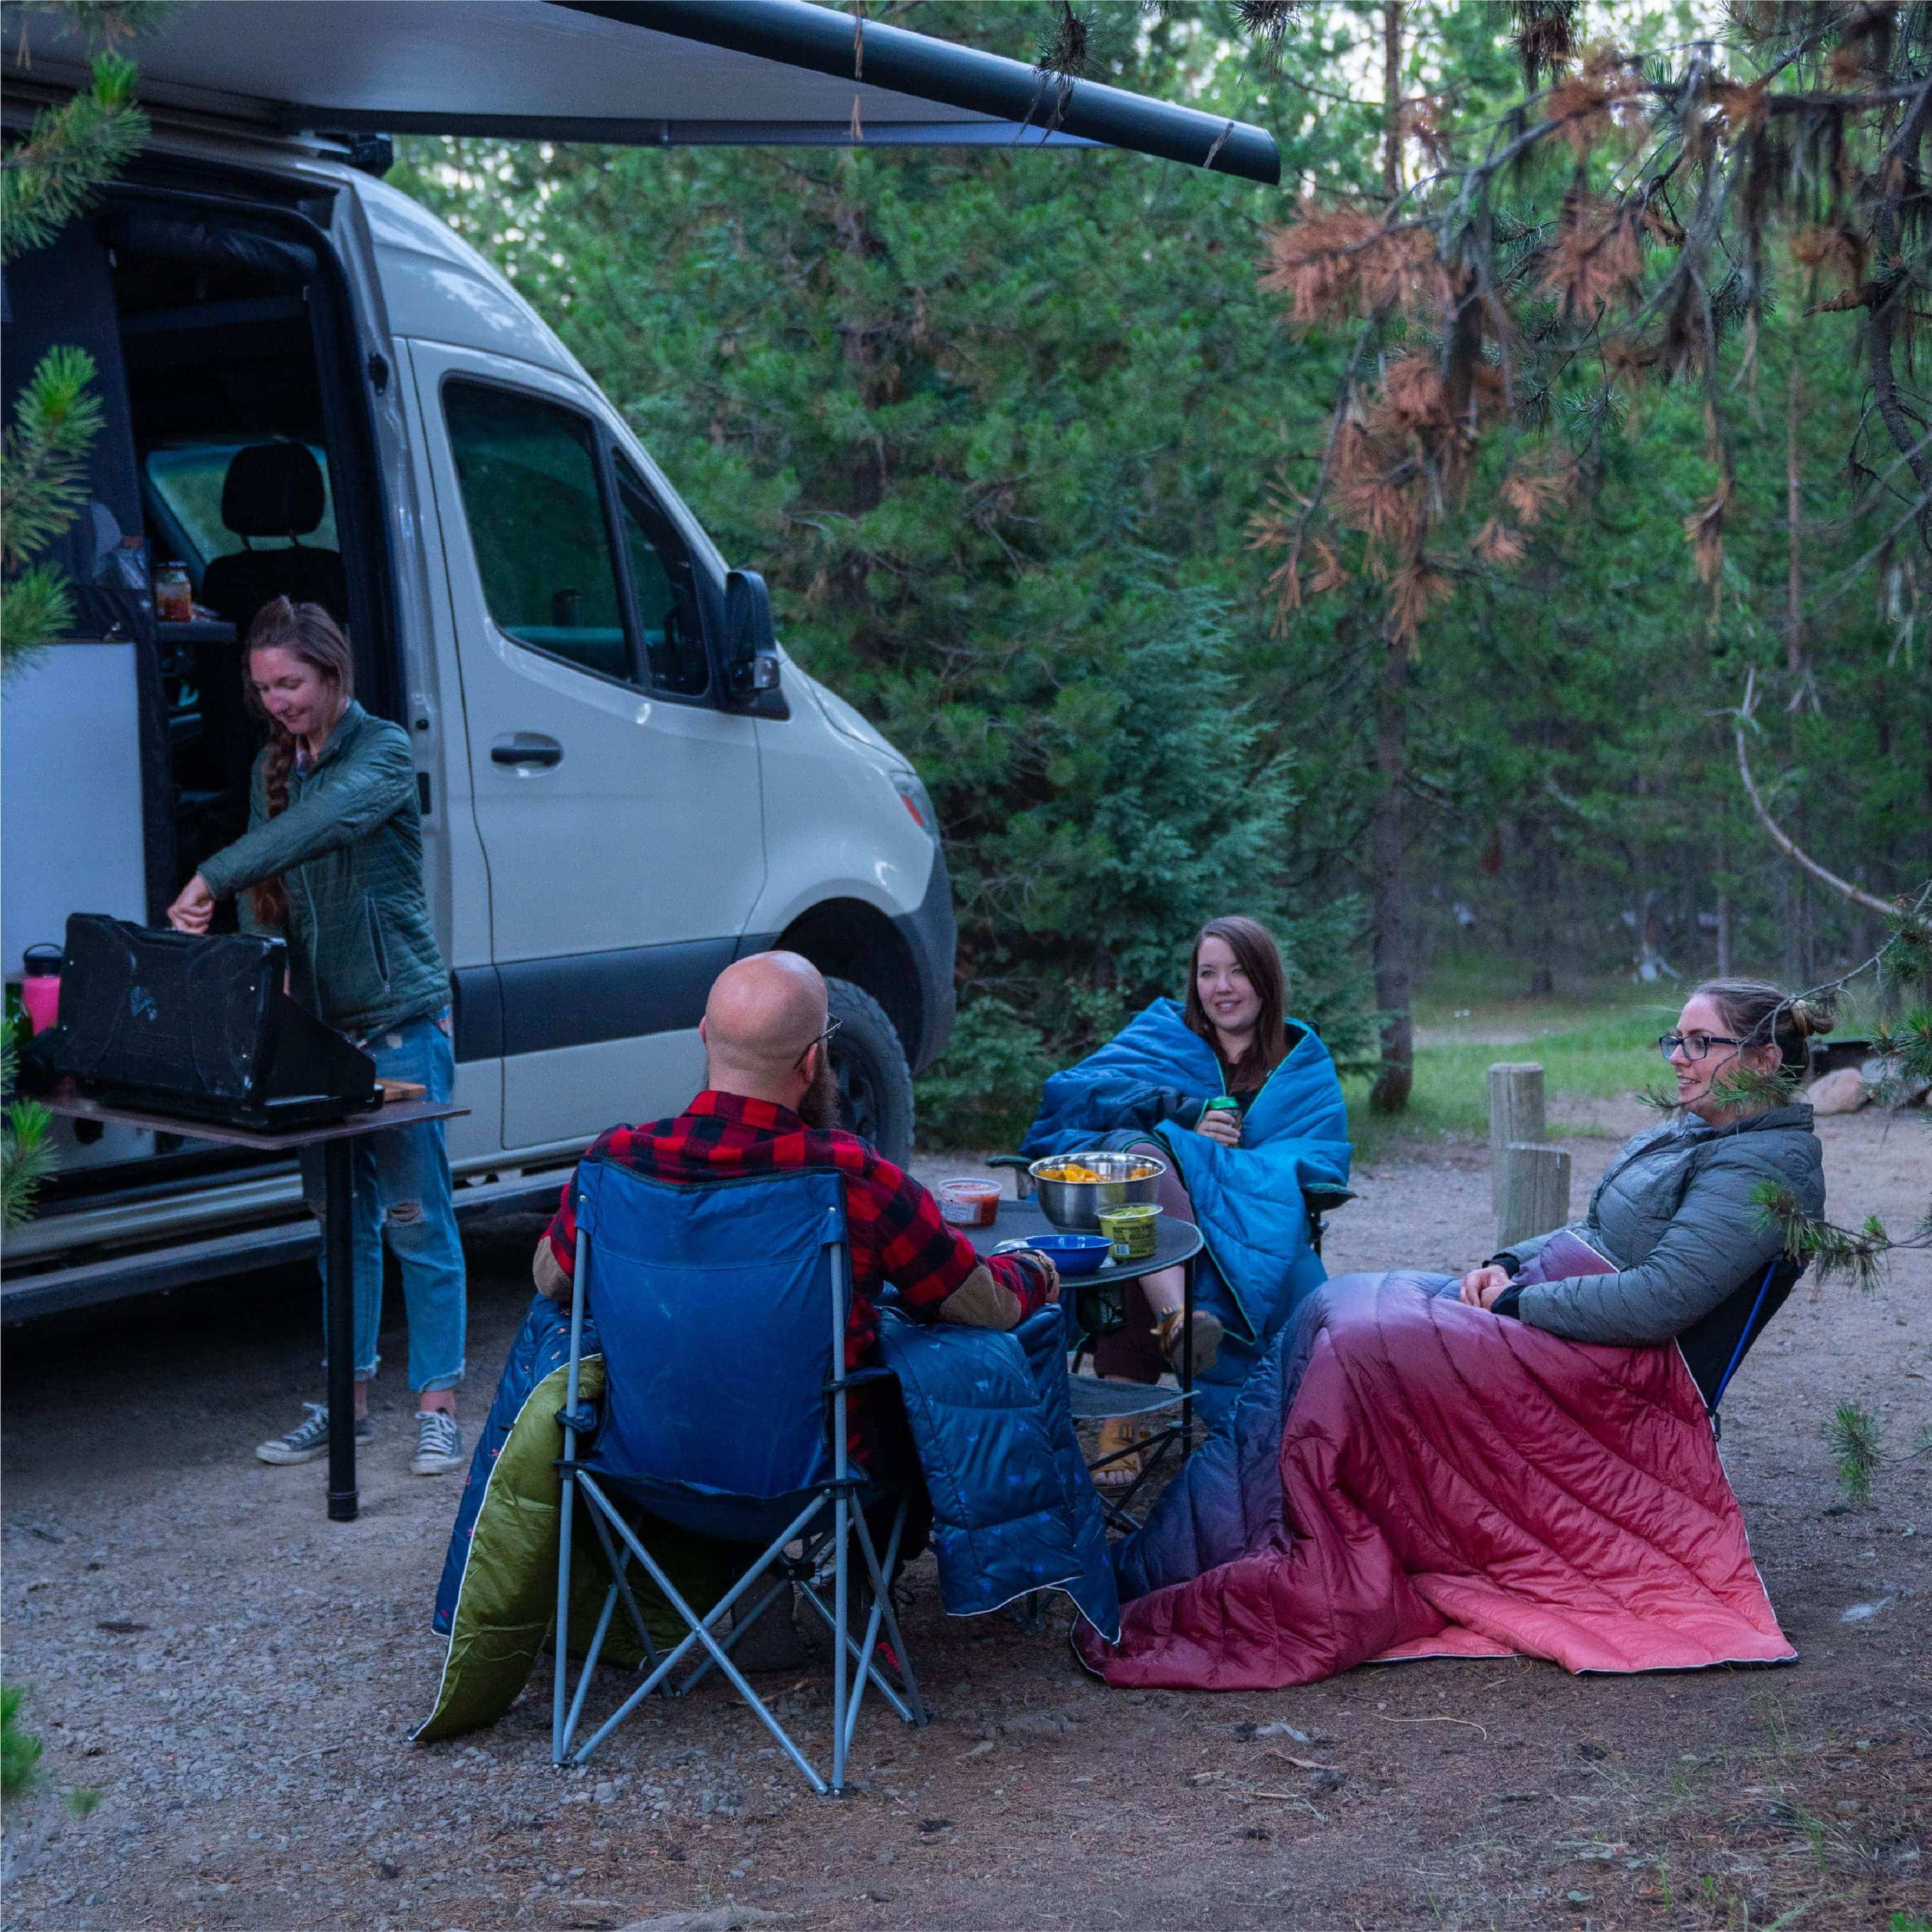 Group of Four Men and Women Having A Picnic Outside Of Camper Van While Wrapped In Original Puffy Blankets